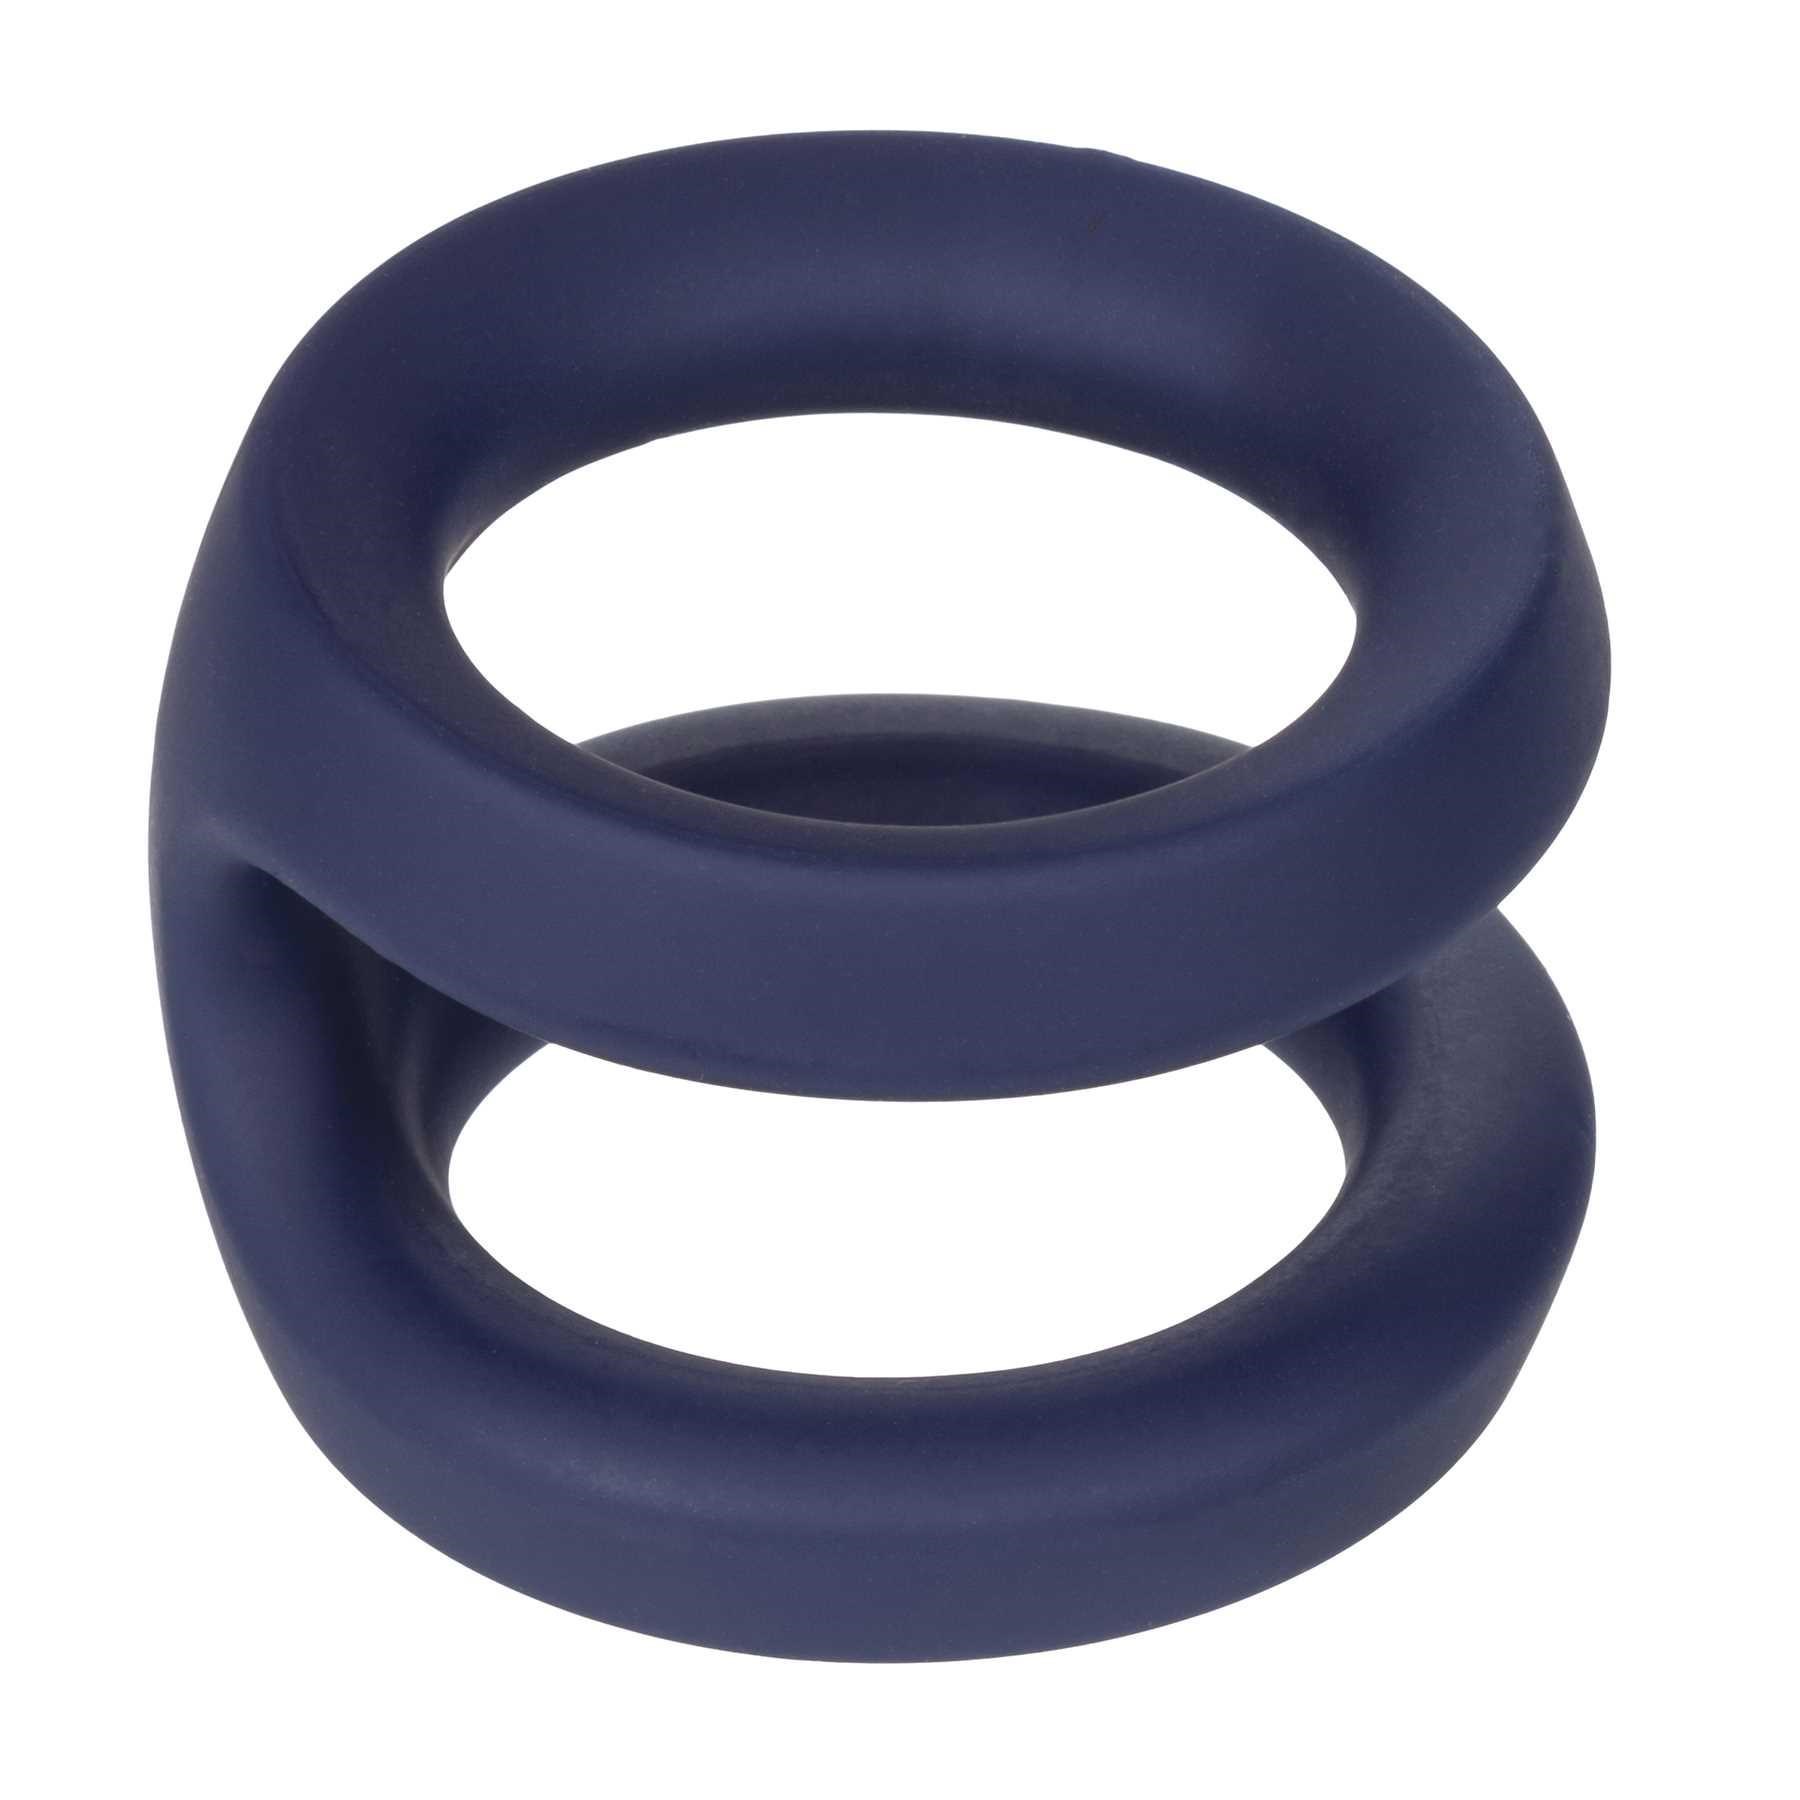 Viceroy Dual Ring product image 5